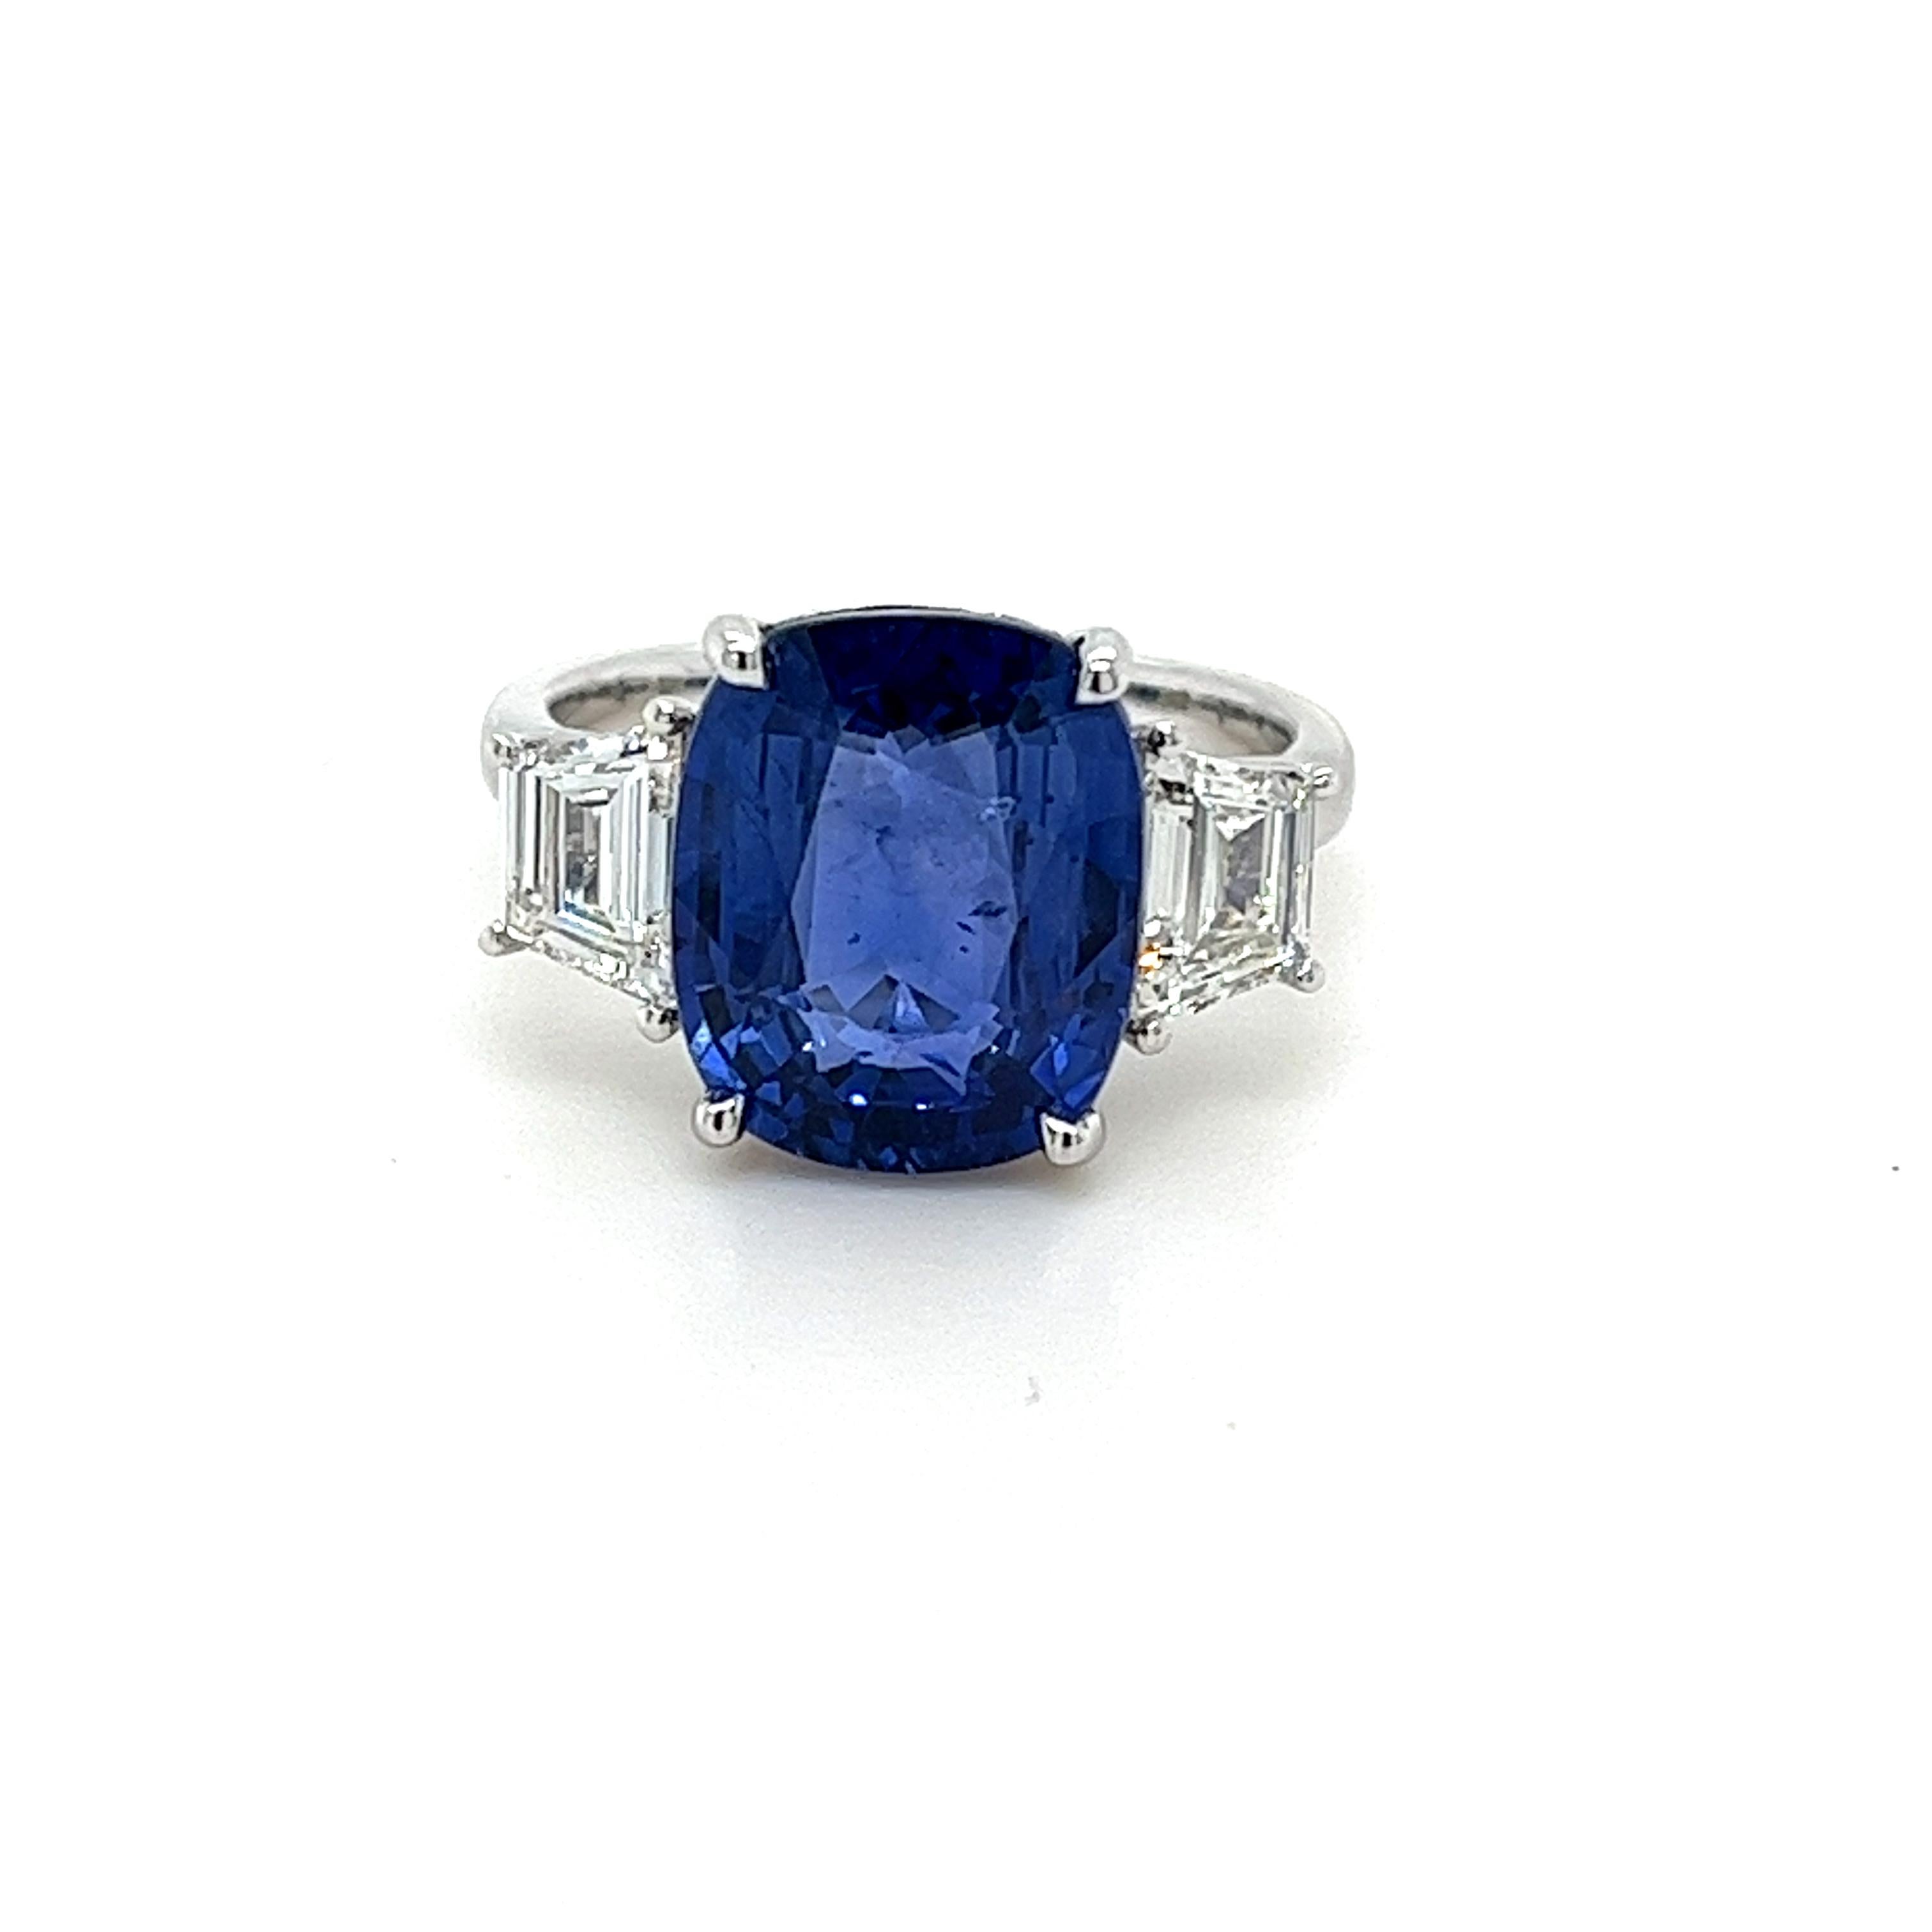 7.19 Carat Ceylon Sapphire & Diamond Three Stone Ring in Platinum In New Condition For Sale In Great Neck, NY